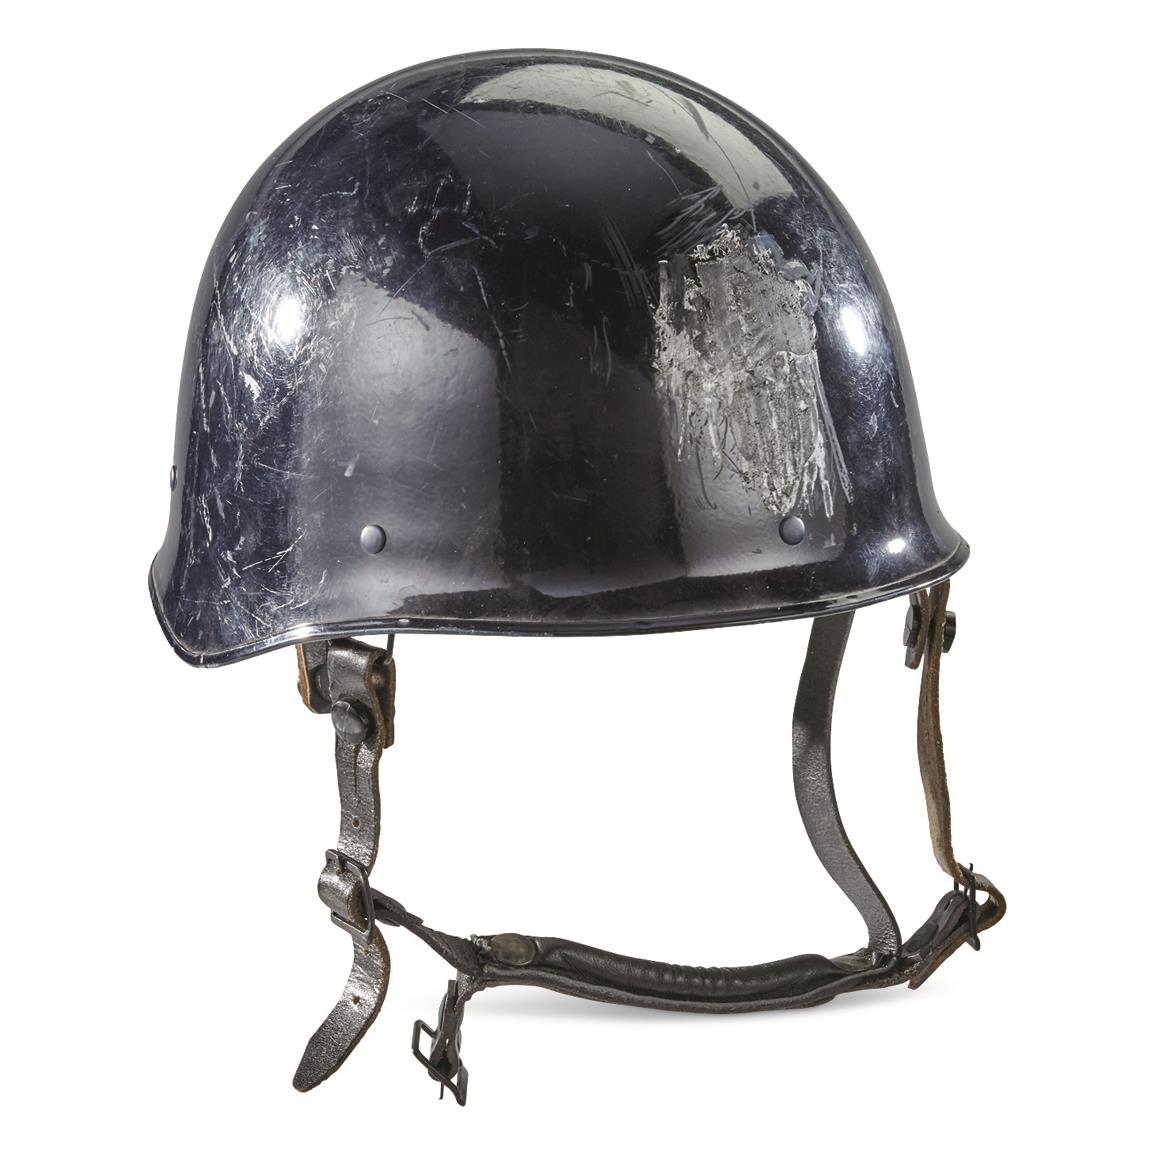 French Police Surplus Helmet with Leather Liner, Used, Navy